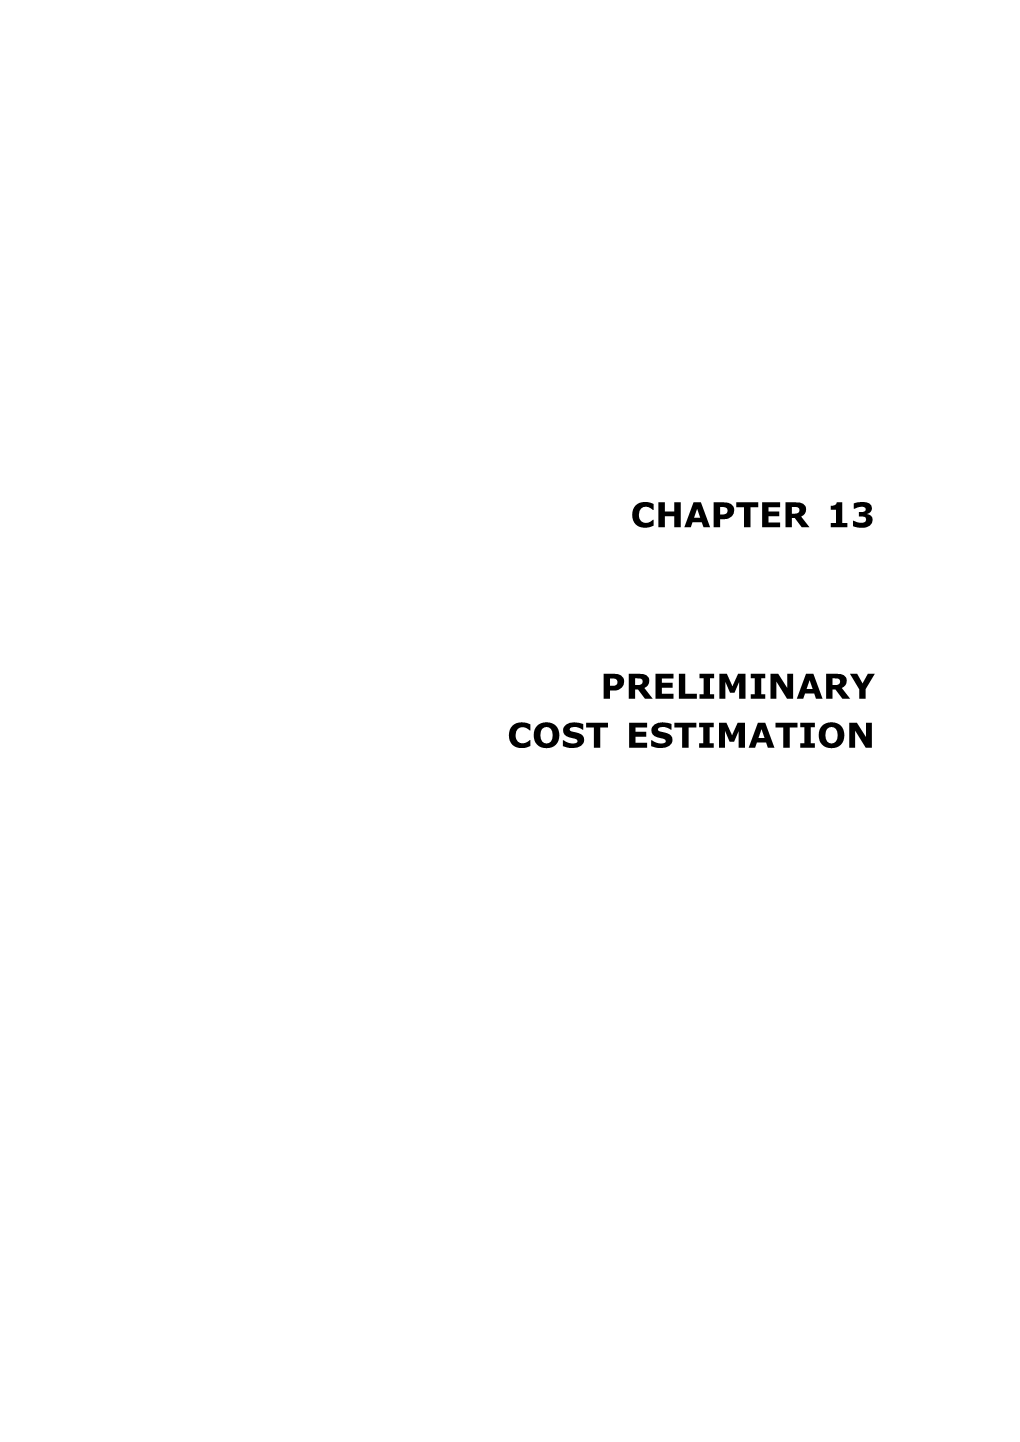 Chapter 13 Preliminary Cost Estimation